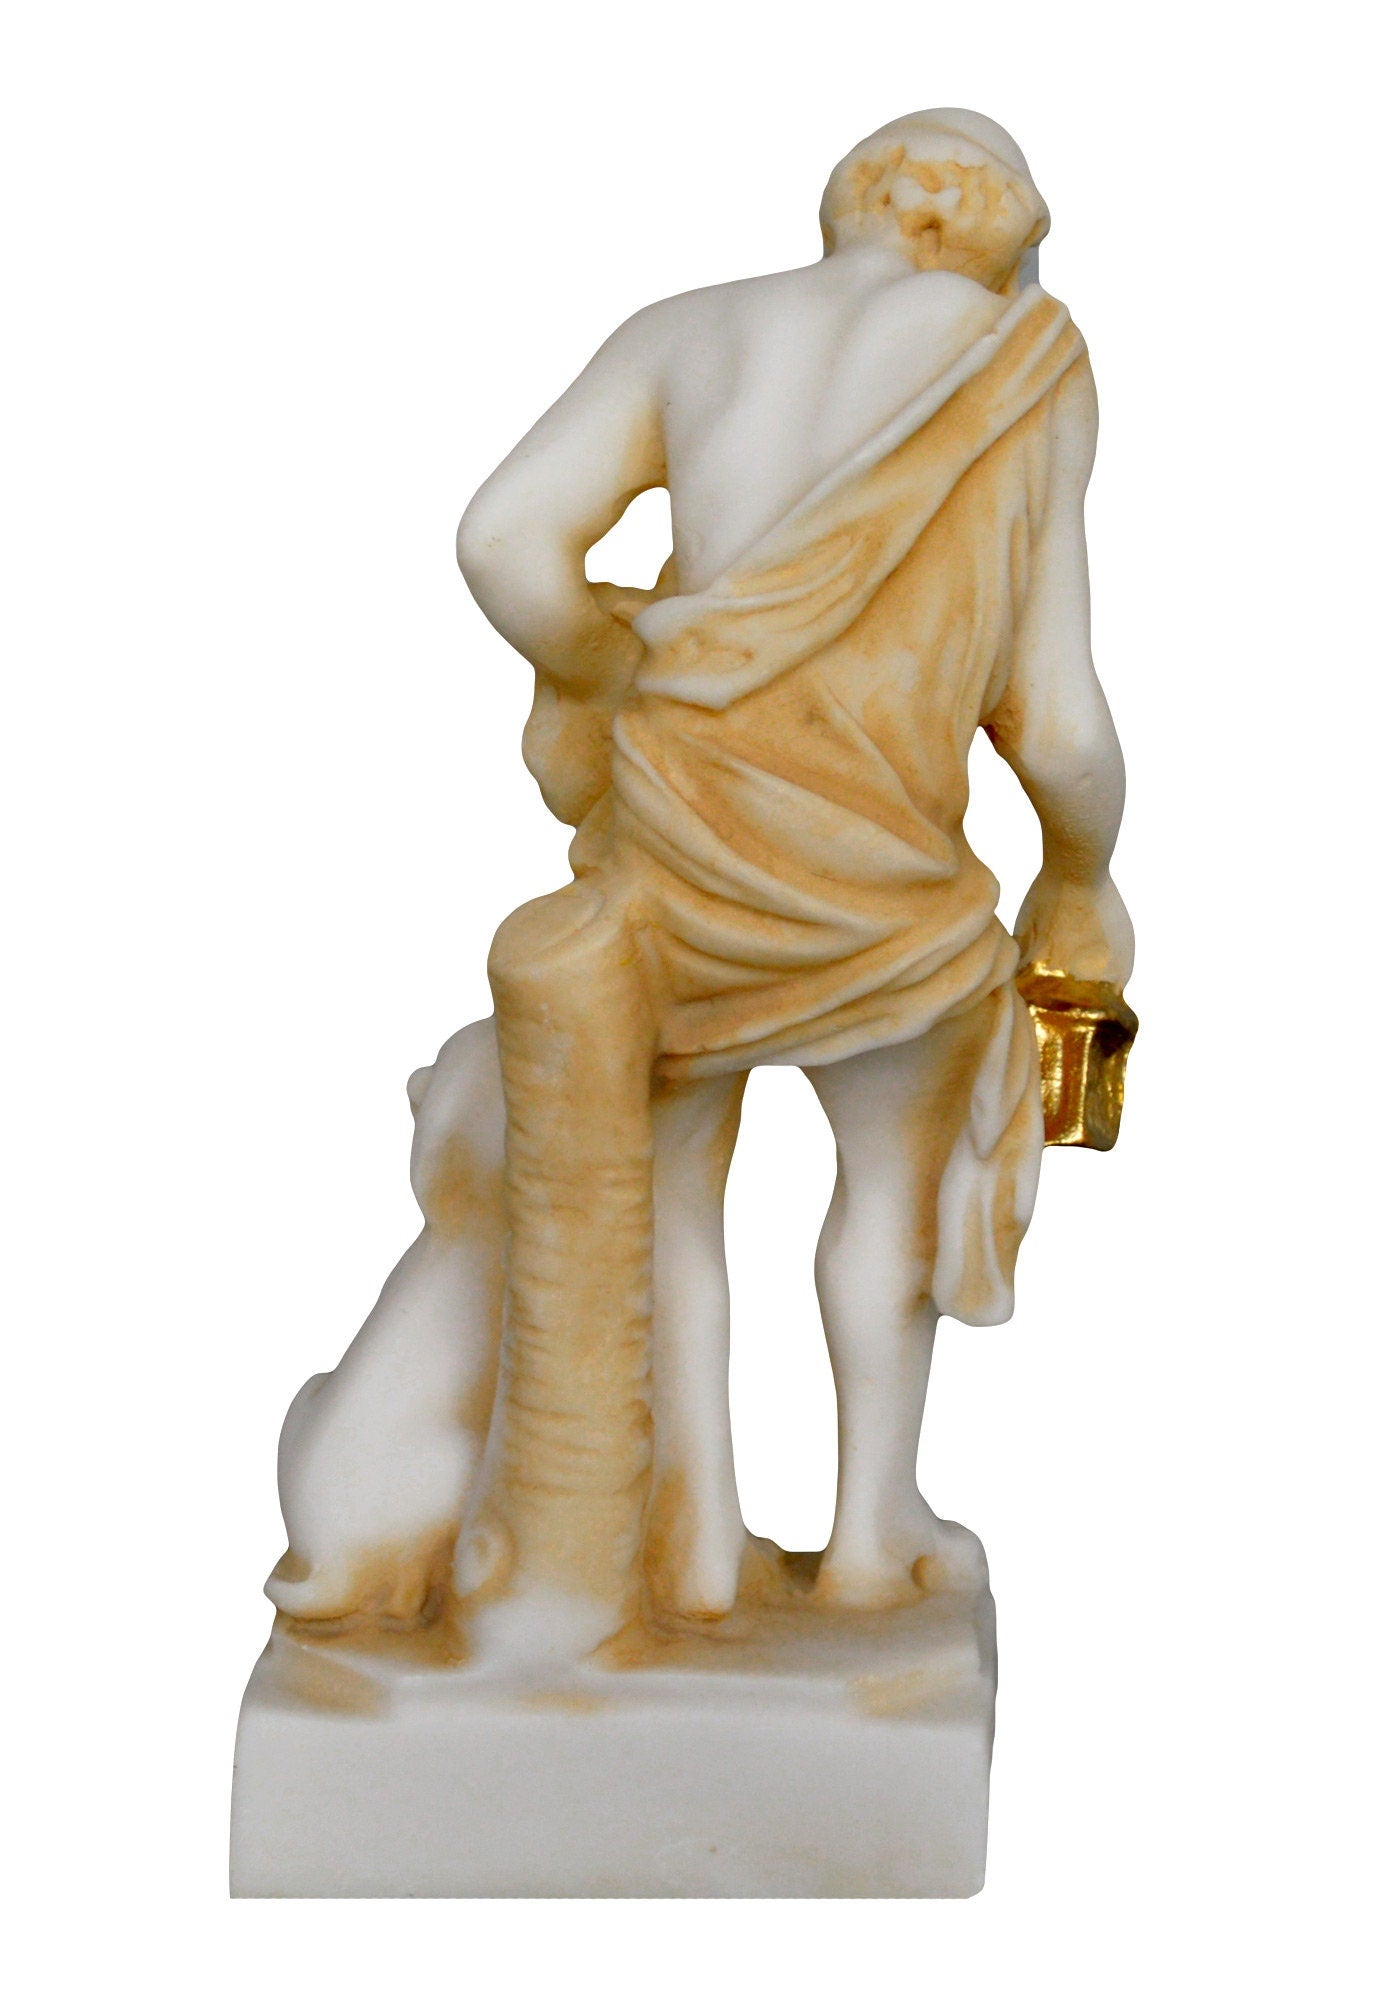 Diogenes the Cynic - Ancient Greek Philosopher - Cynicism - Student of Antisthenes - Aged Alabaster Statue